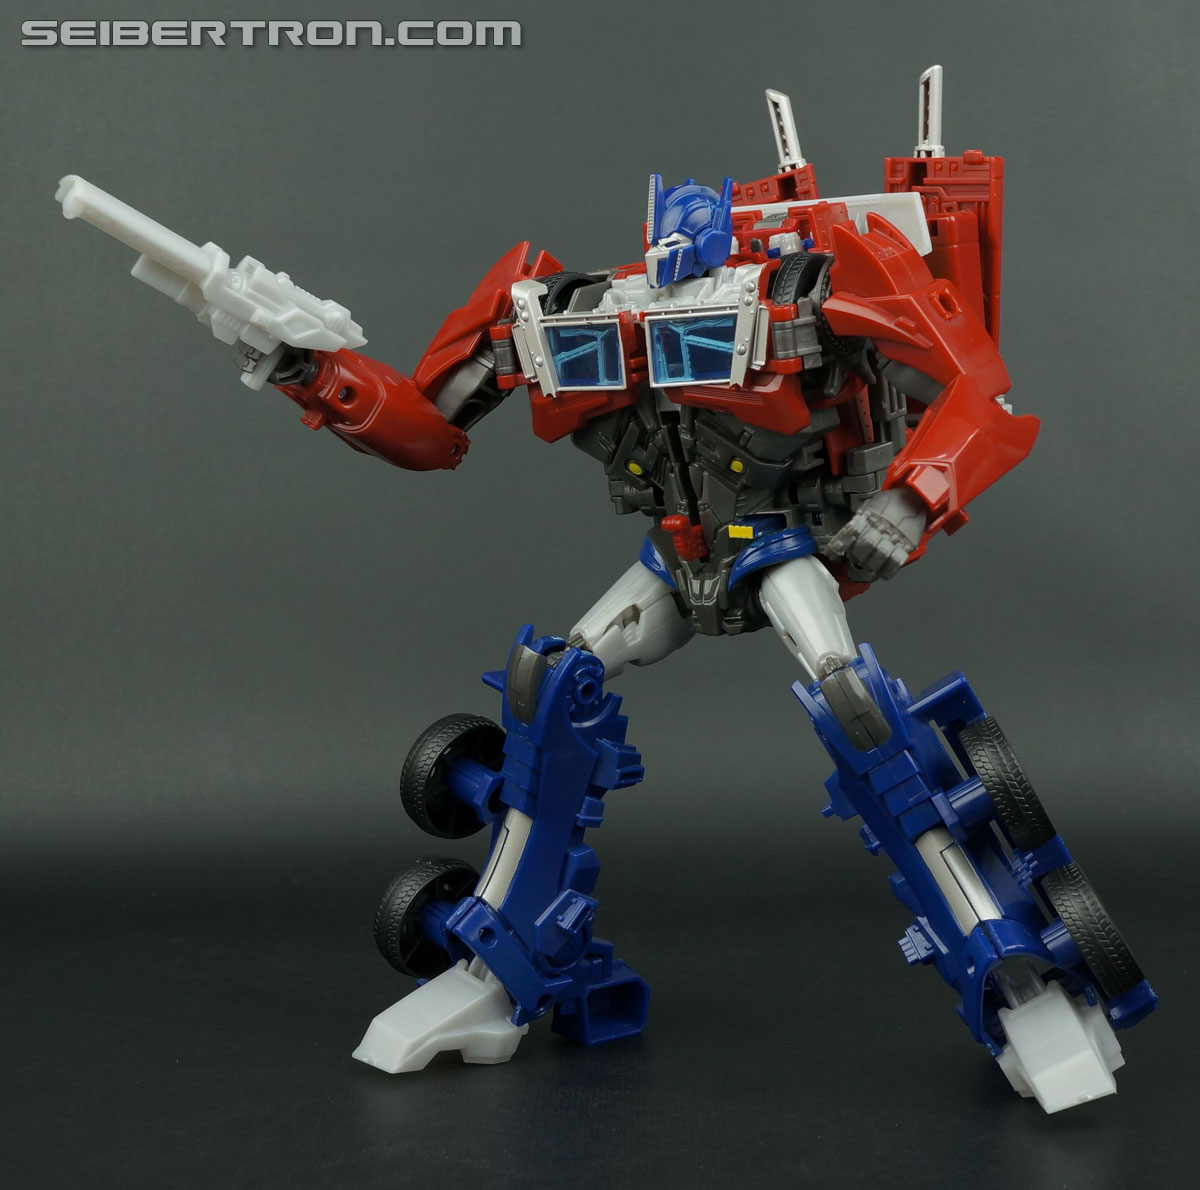 Transformers Prime: Robots In Disguise Optimus Prime (Image #79 of 163)